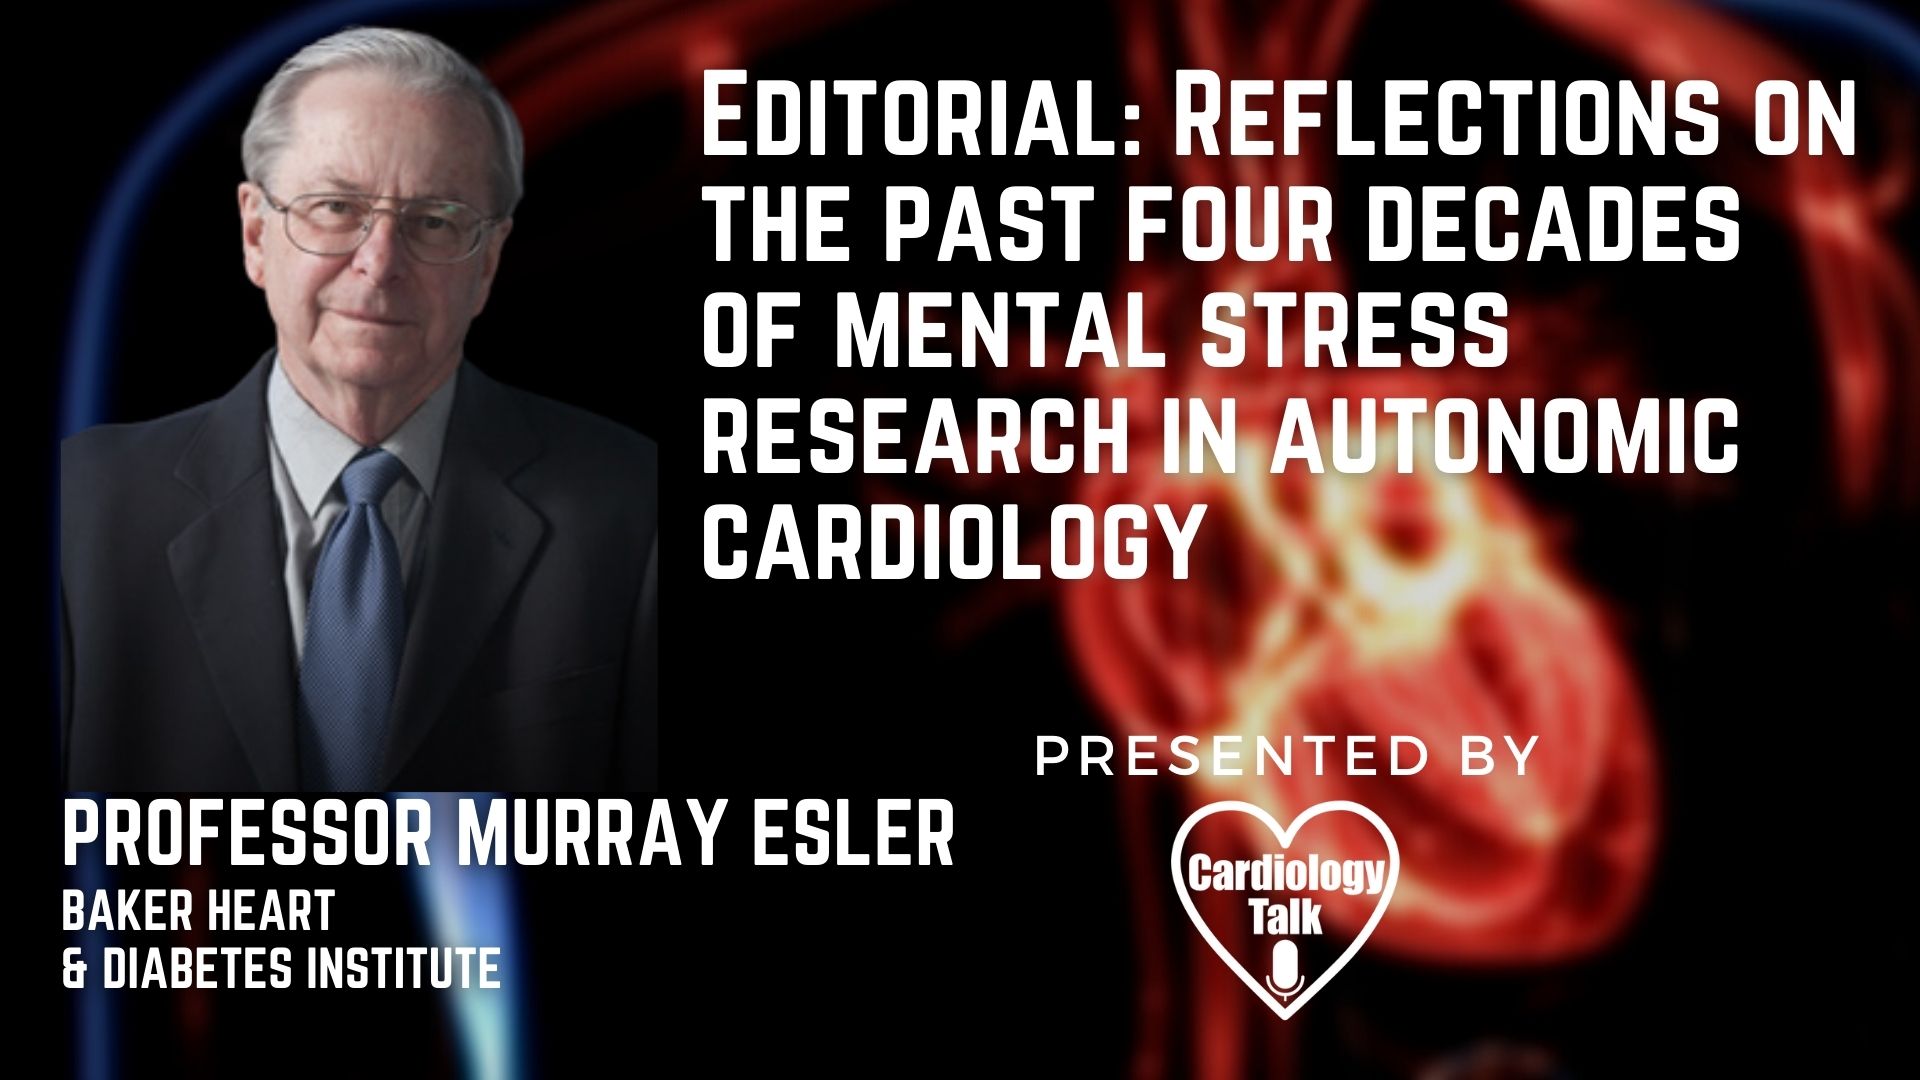 Prof. Murray Esler @EslerMurray @BakerResearchAu #AutonomicCardiology #Cardiology #Research Editorial - Reflections on the past four decades of mental stress research in autonomic cardiology